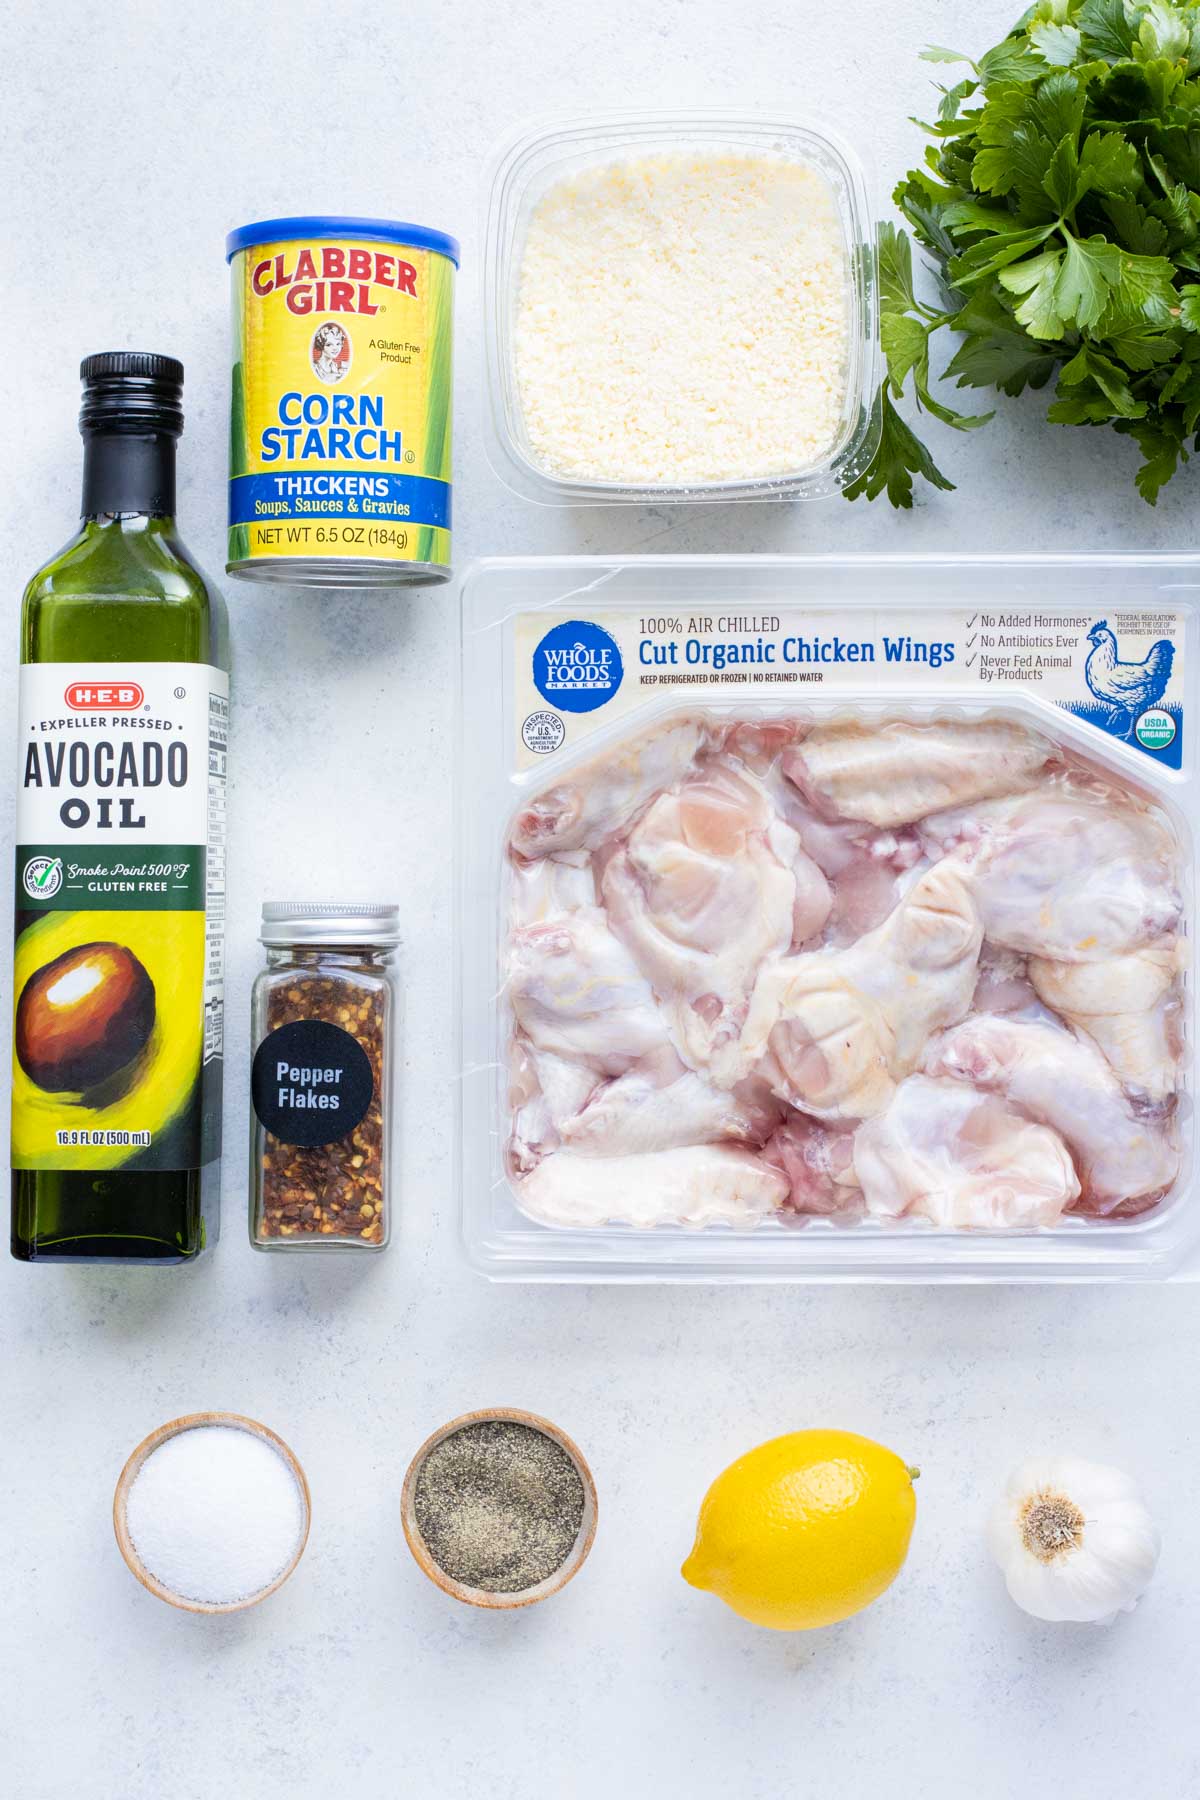 Wings, oil, cornstarch, parmesan, lemon juice, garlic, salt, pepper, and parsley are the ingredients for this recipe.